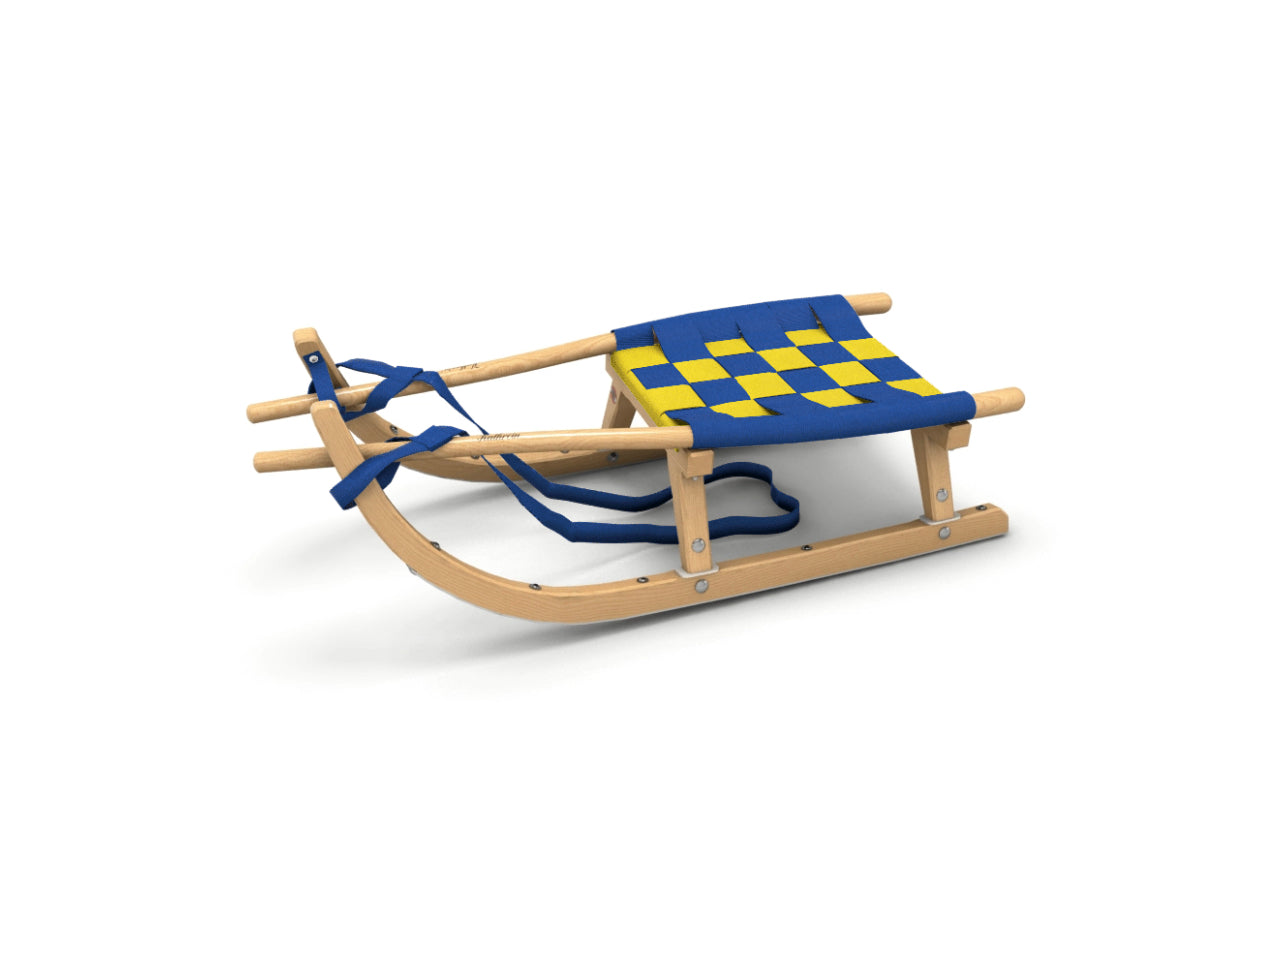 Toboggan (90cm) with belt seat from approx. 6 years of age